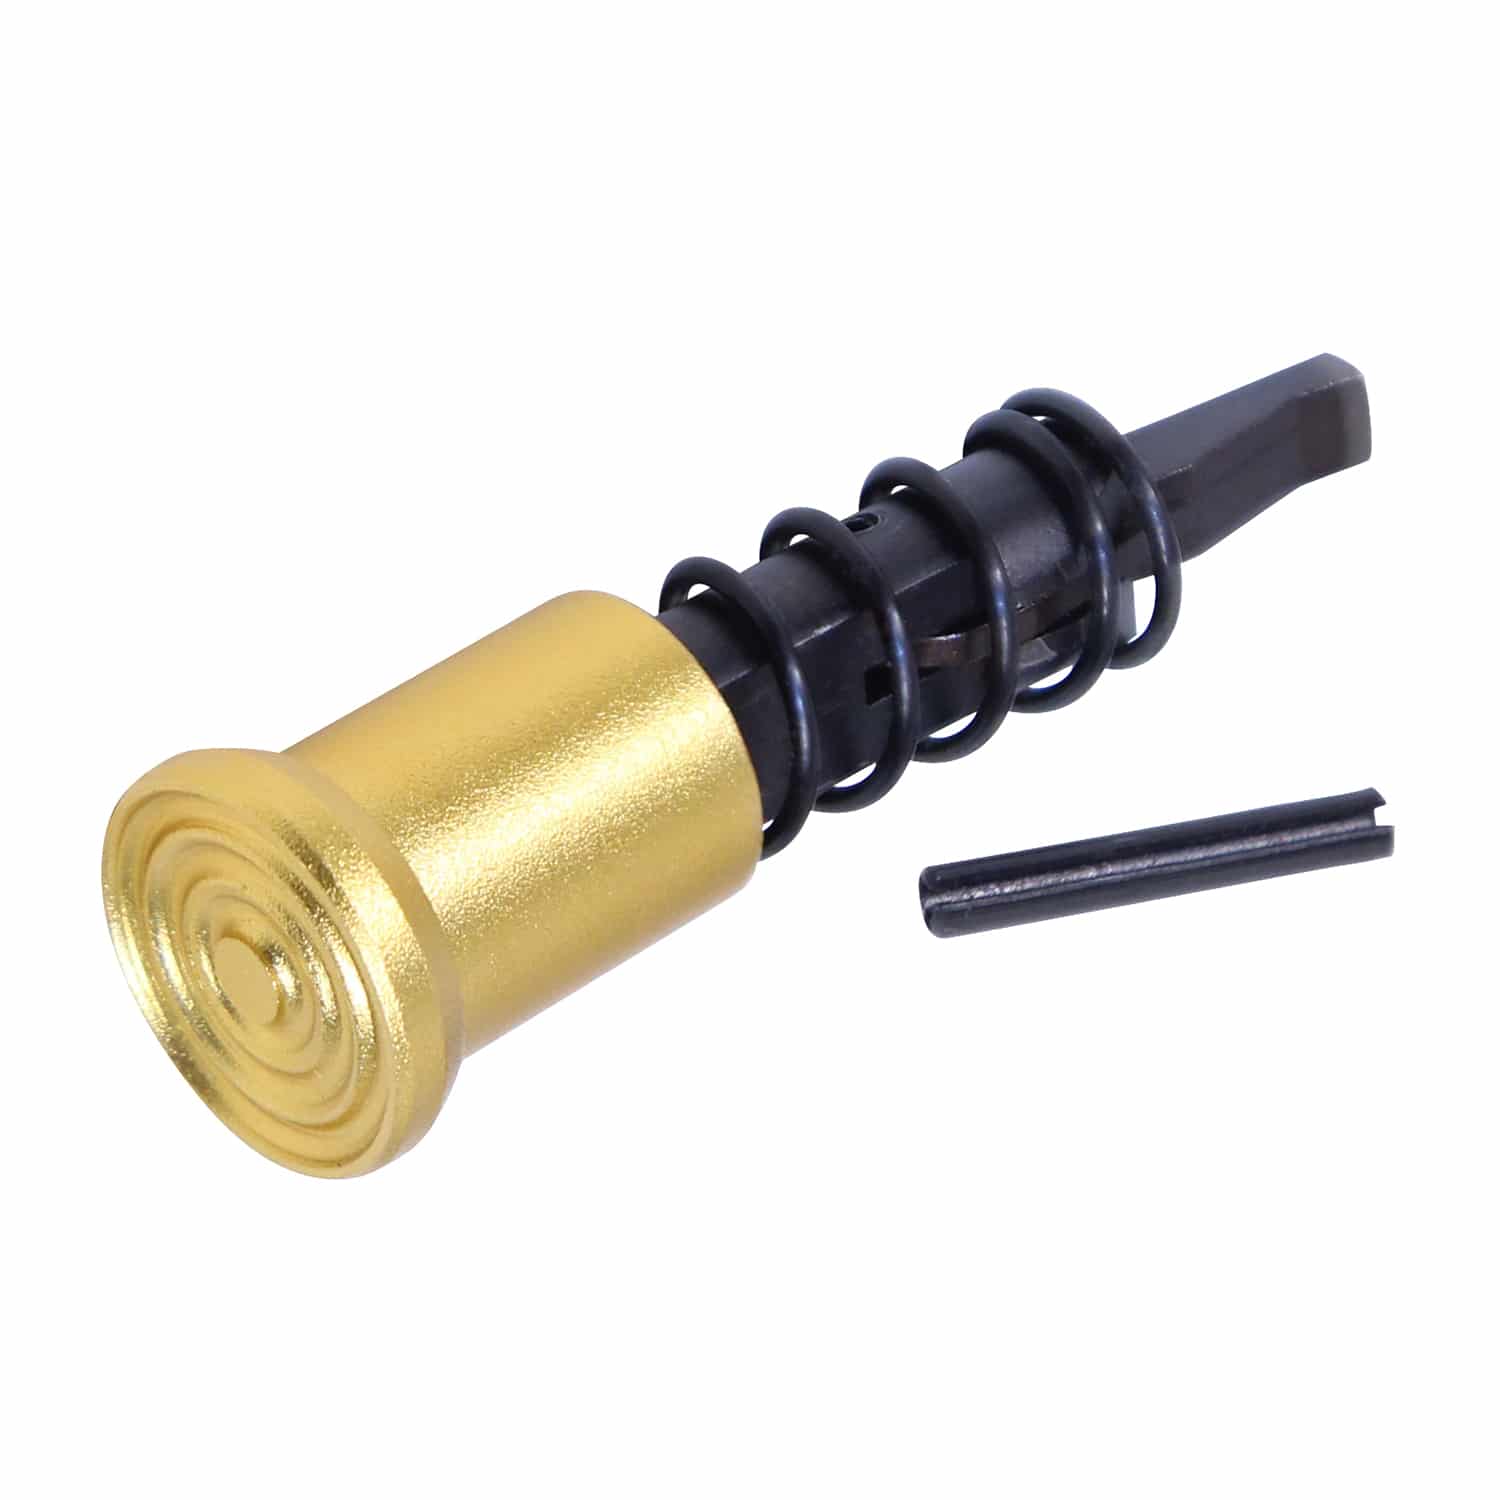 AR-15 Forward Assist Assembly in Anodized Gold